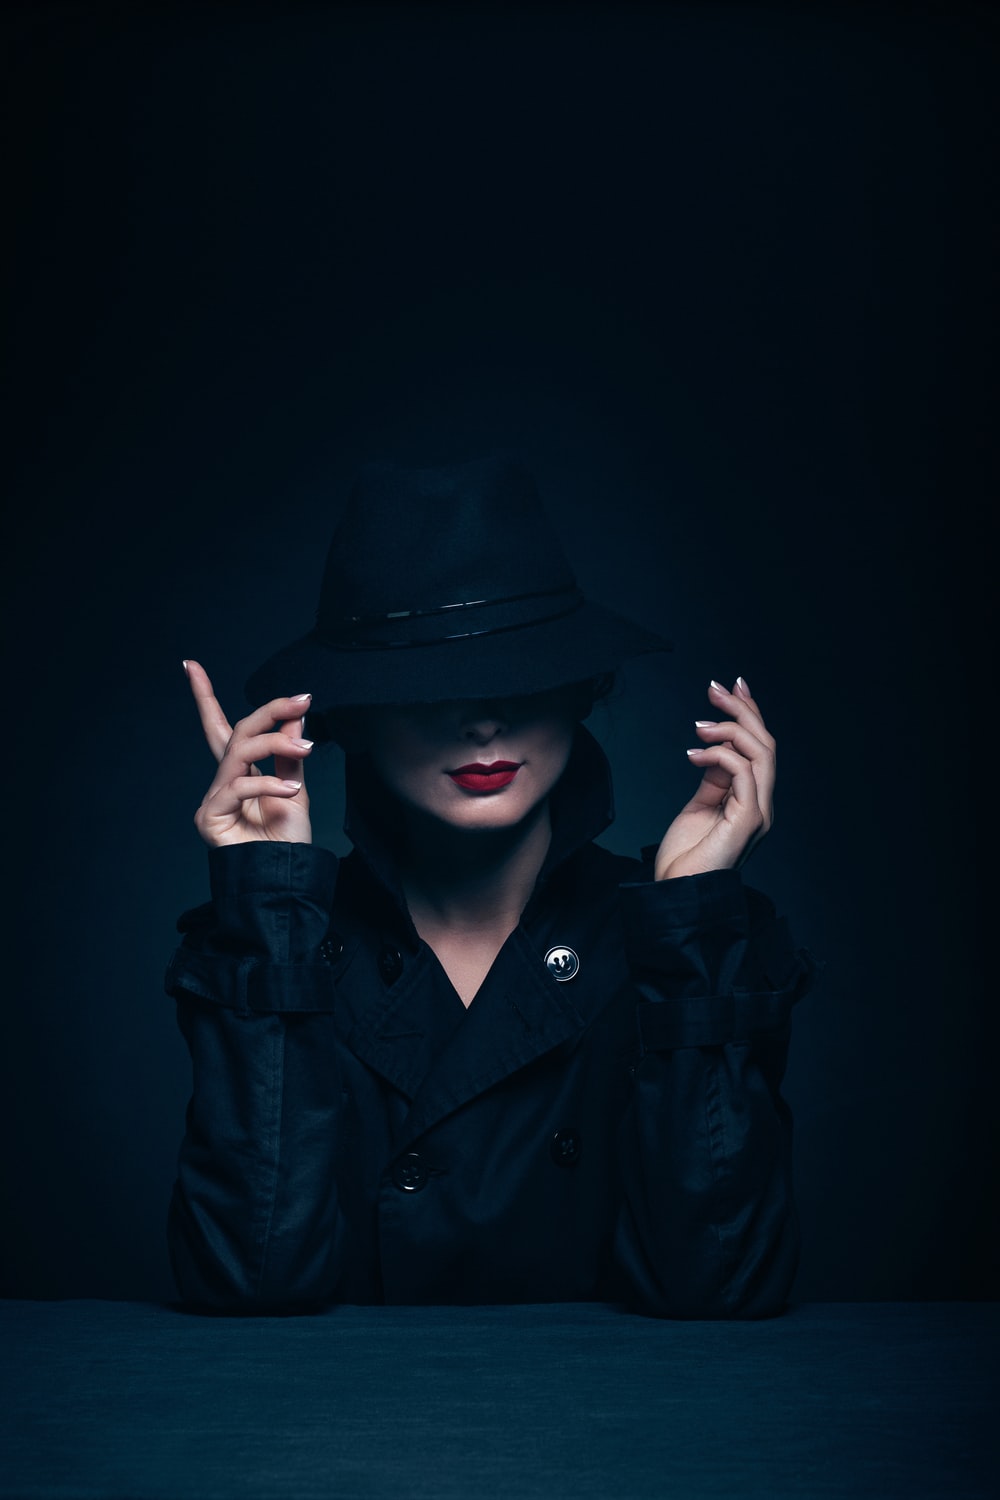 Woman In Black Coat And Hat Photo Moscow Image